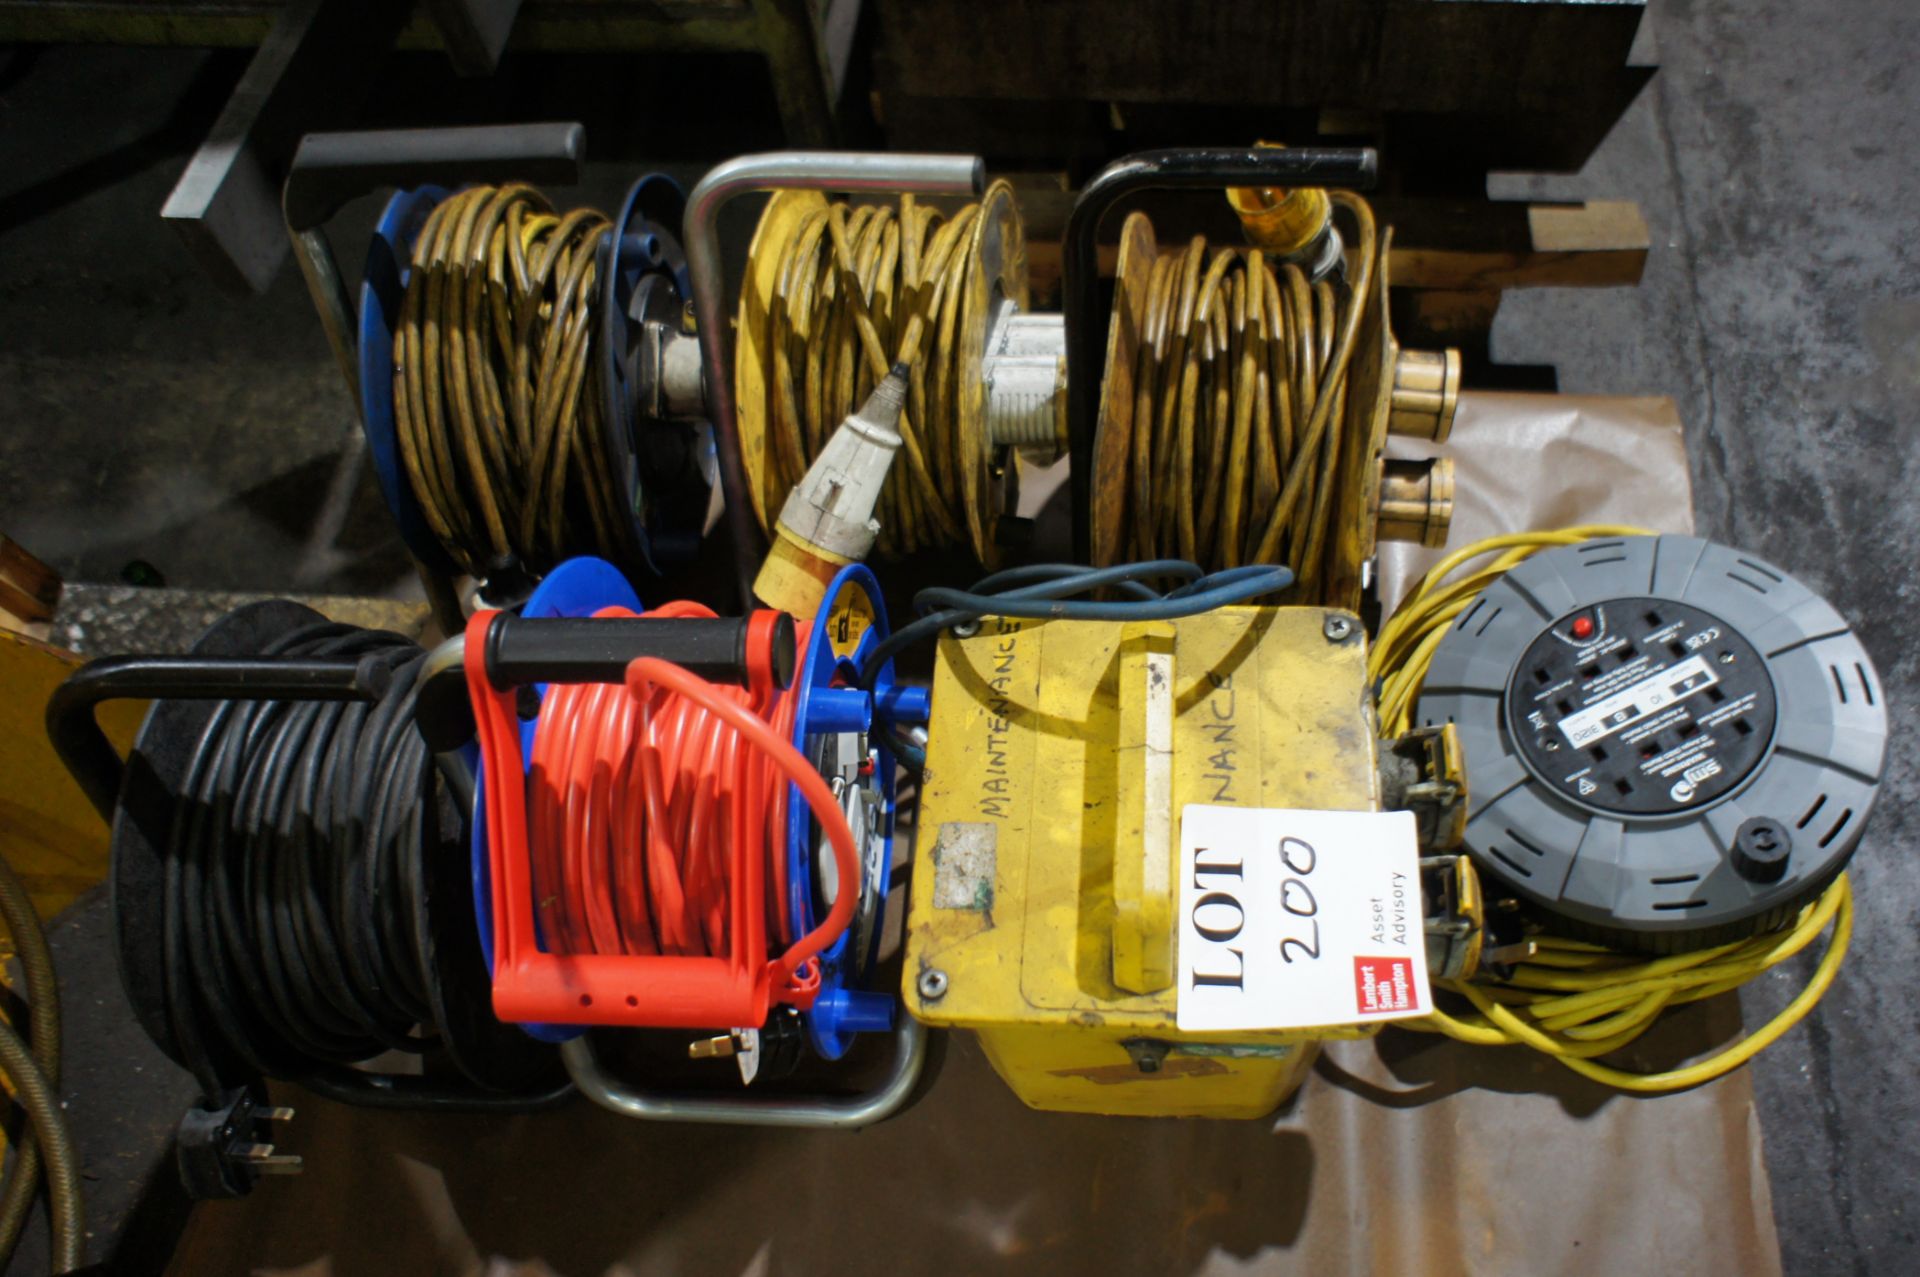 6 Various electrical extension cables with 3.3kVA 110v tool transformer